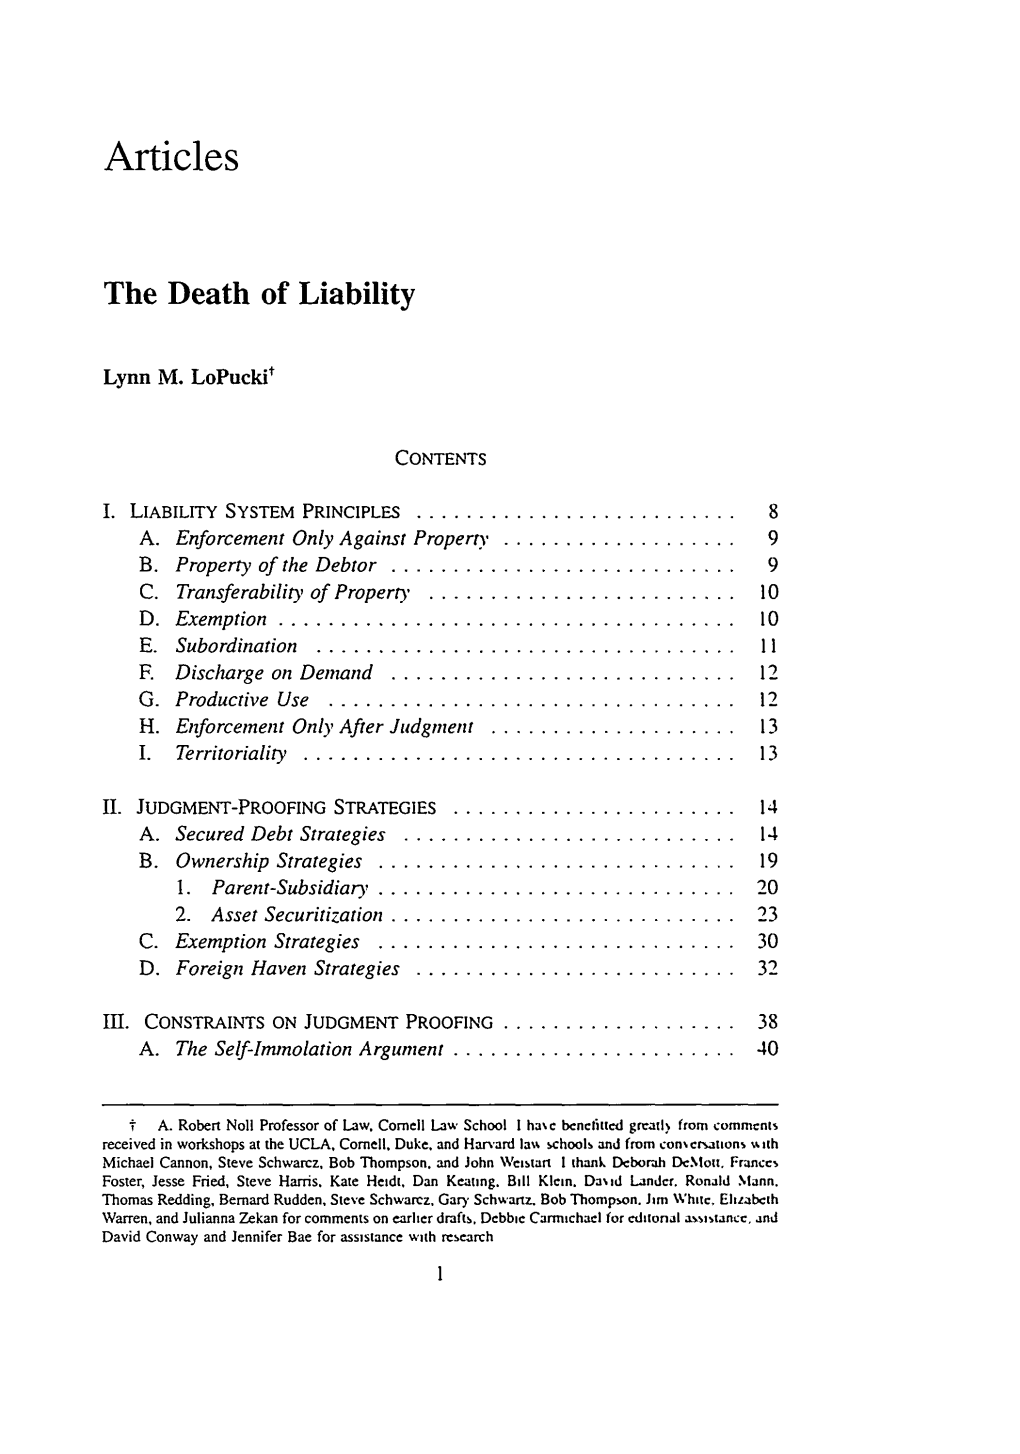 The Death of Liability